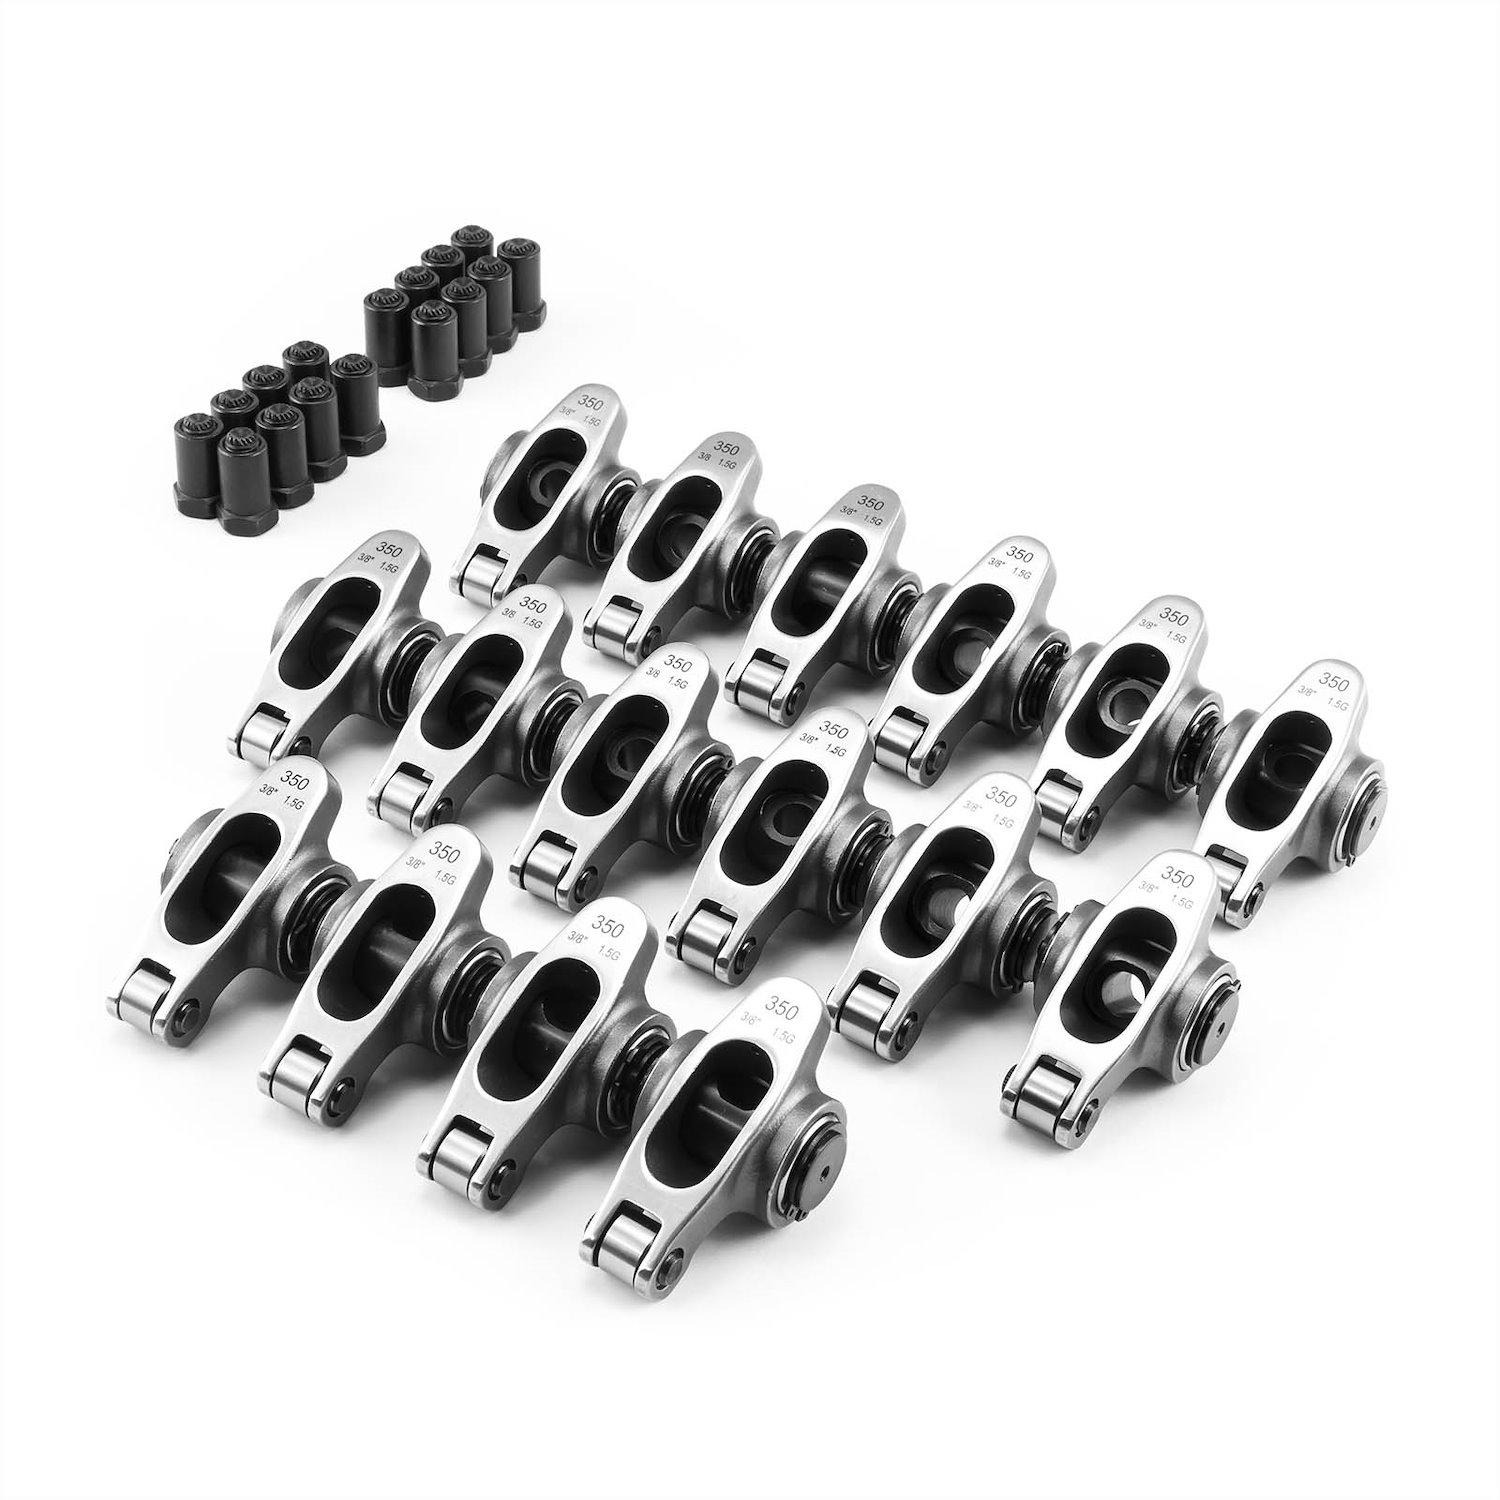 Stainless Steel Roller Rocker Arm Set Small Block Chevy 350